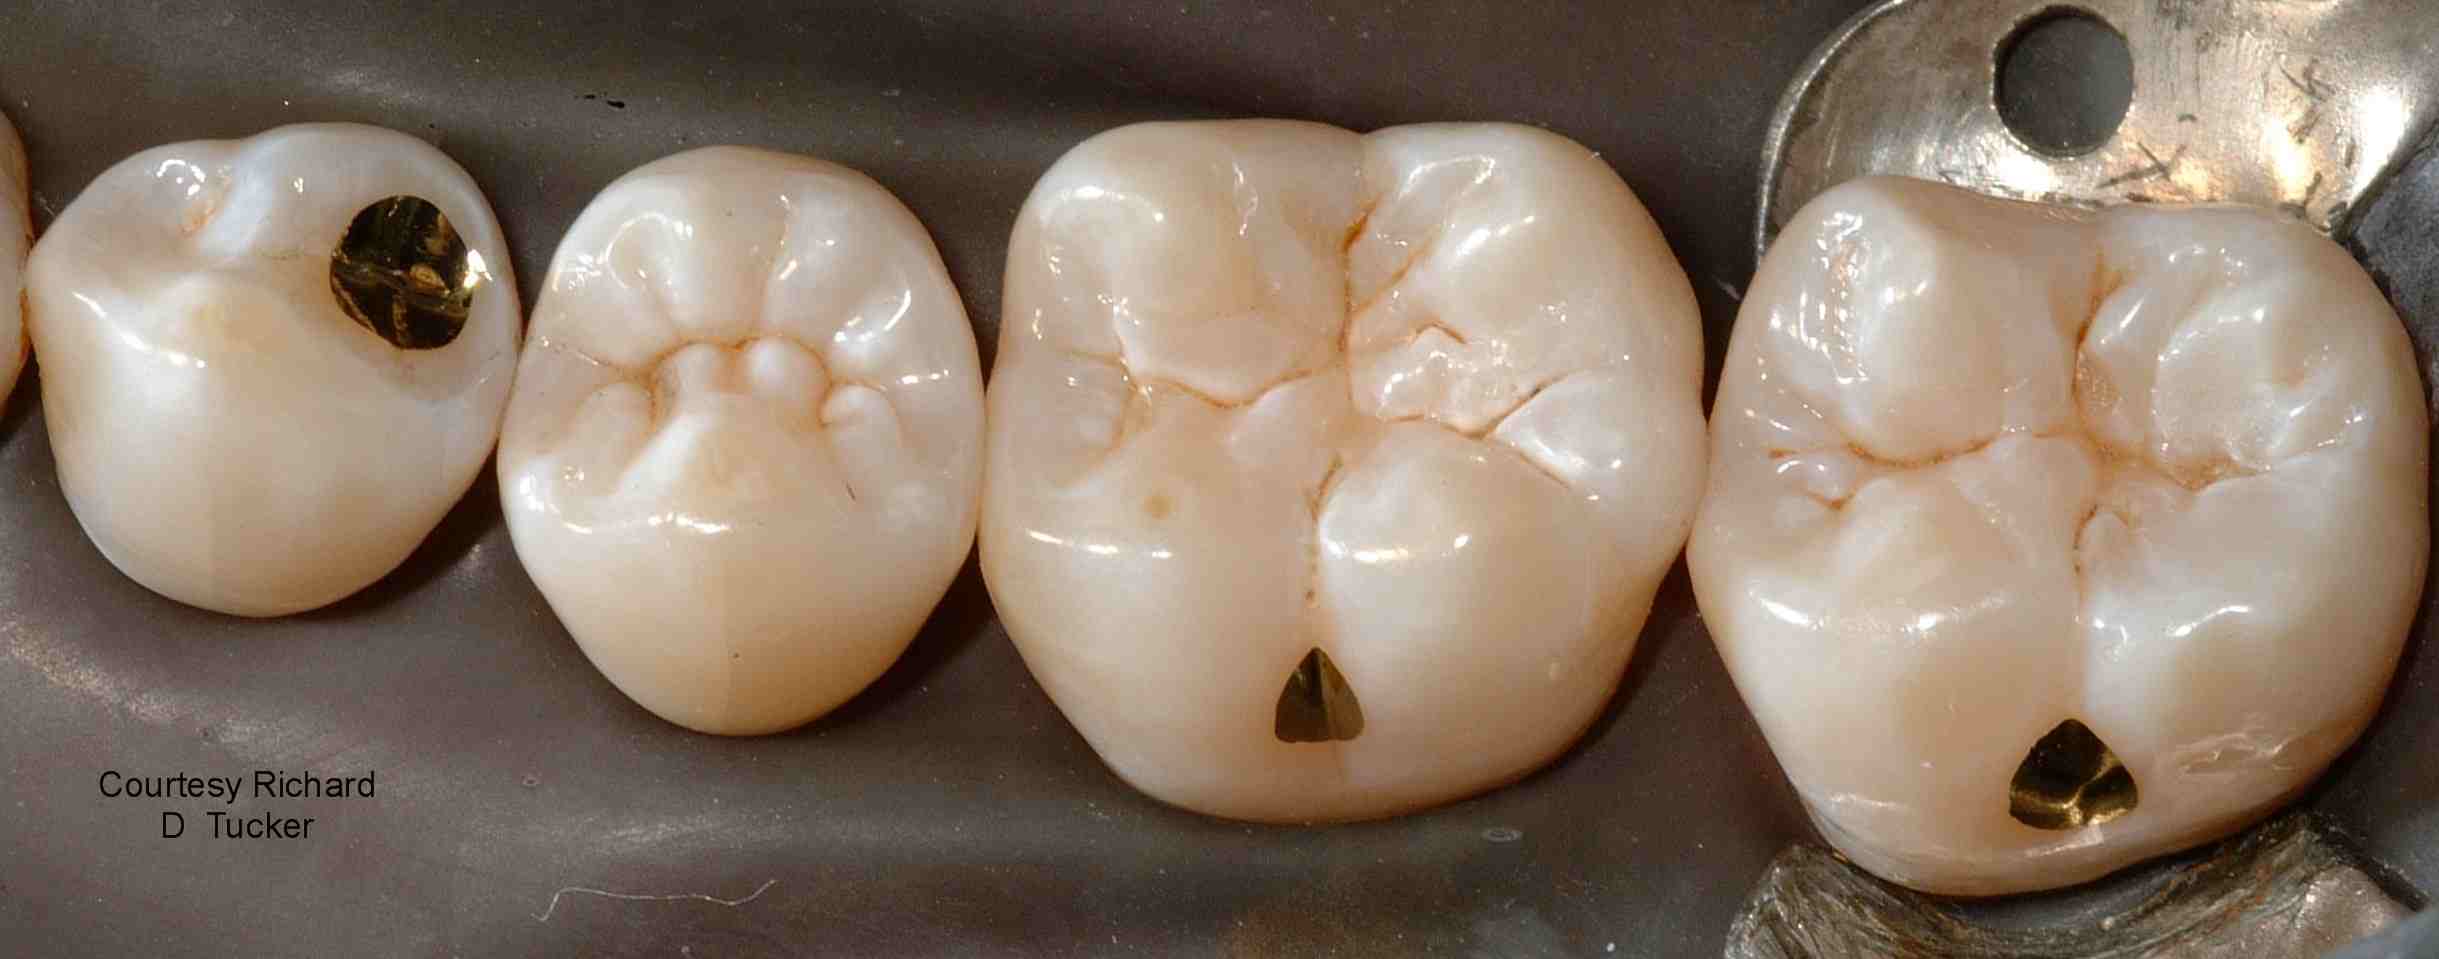 Amalgam Restorations And The Gold Standard For